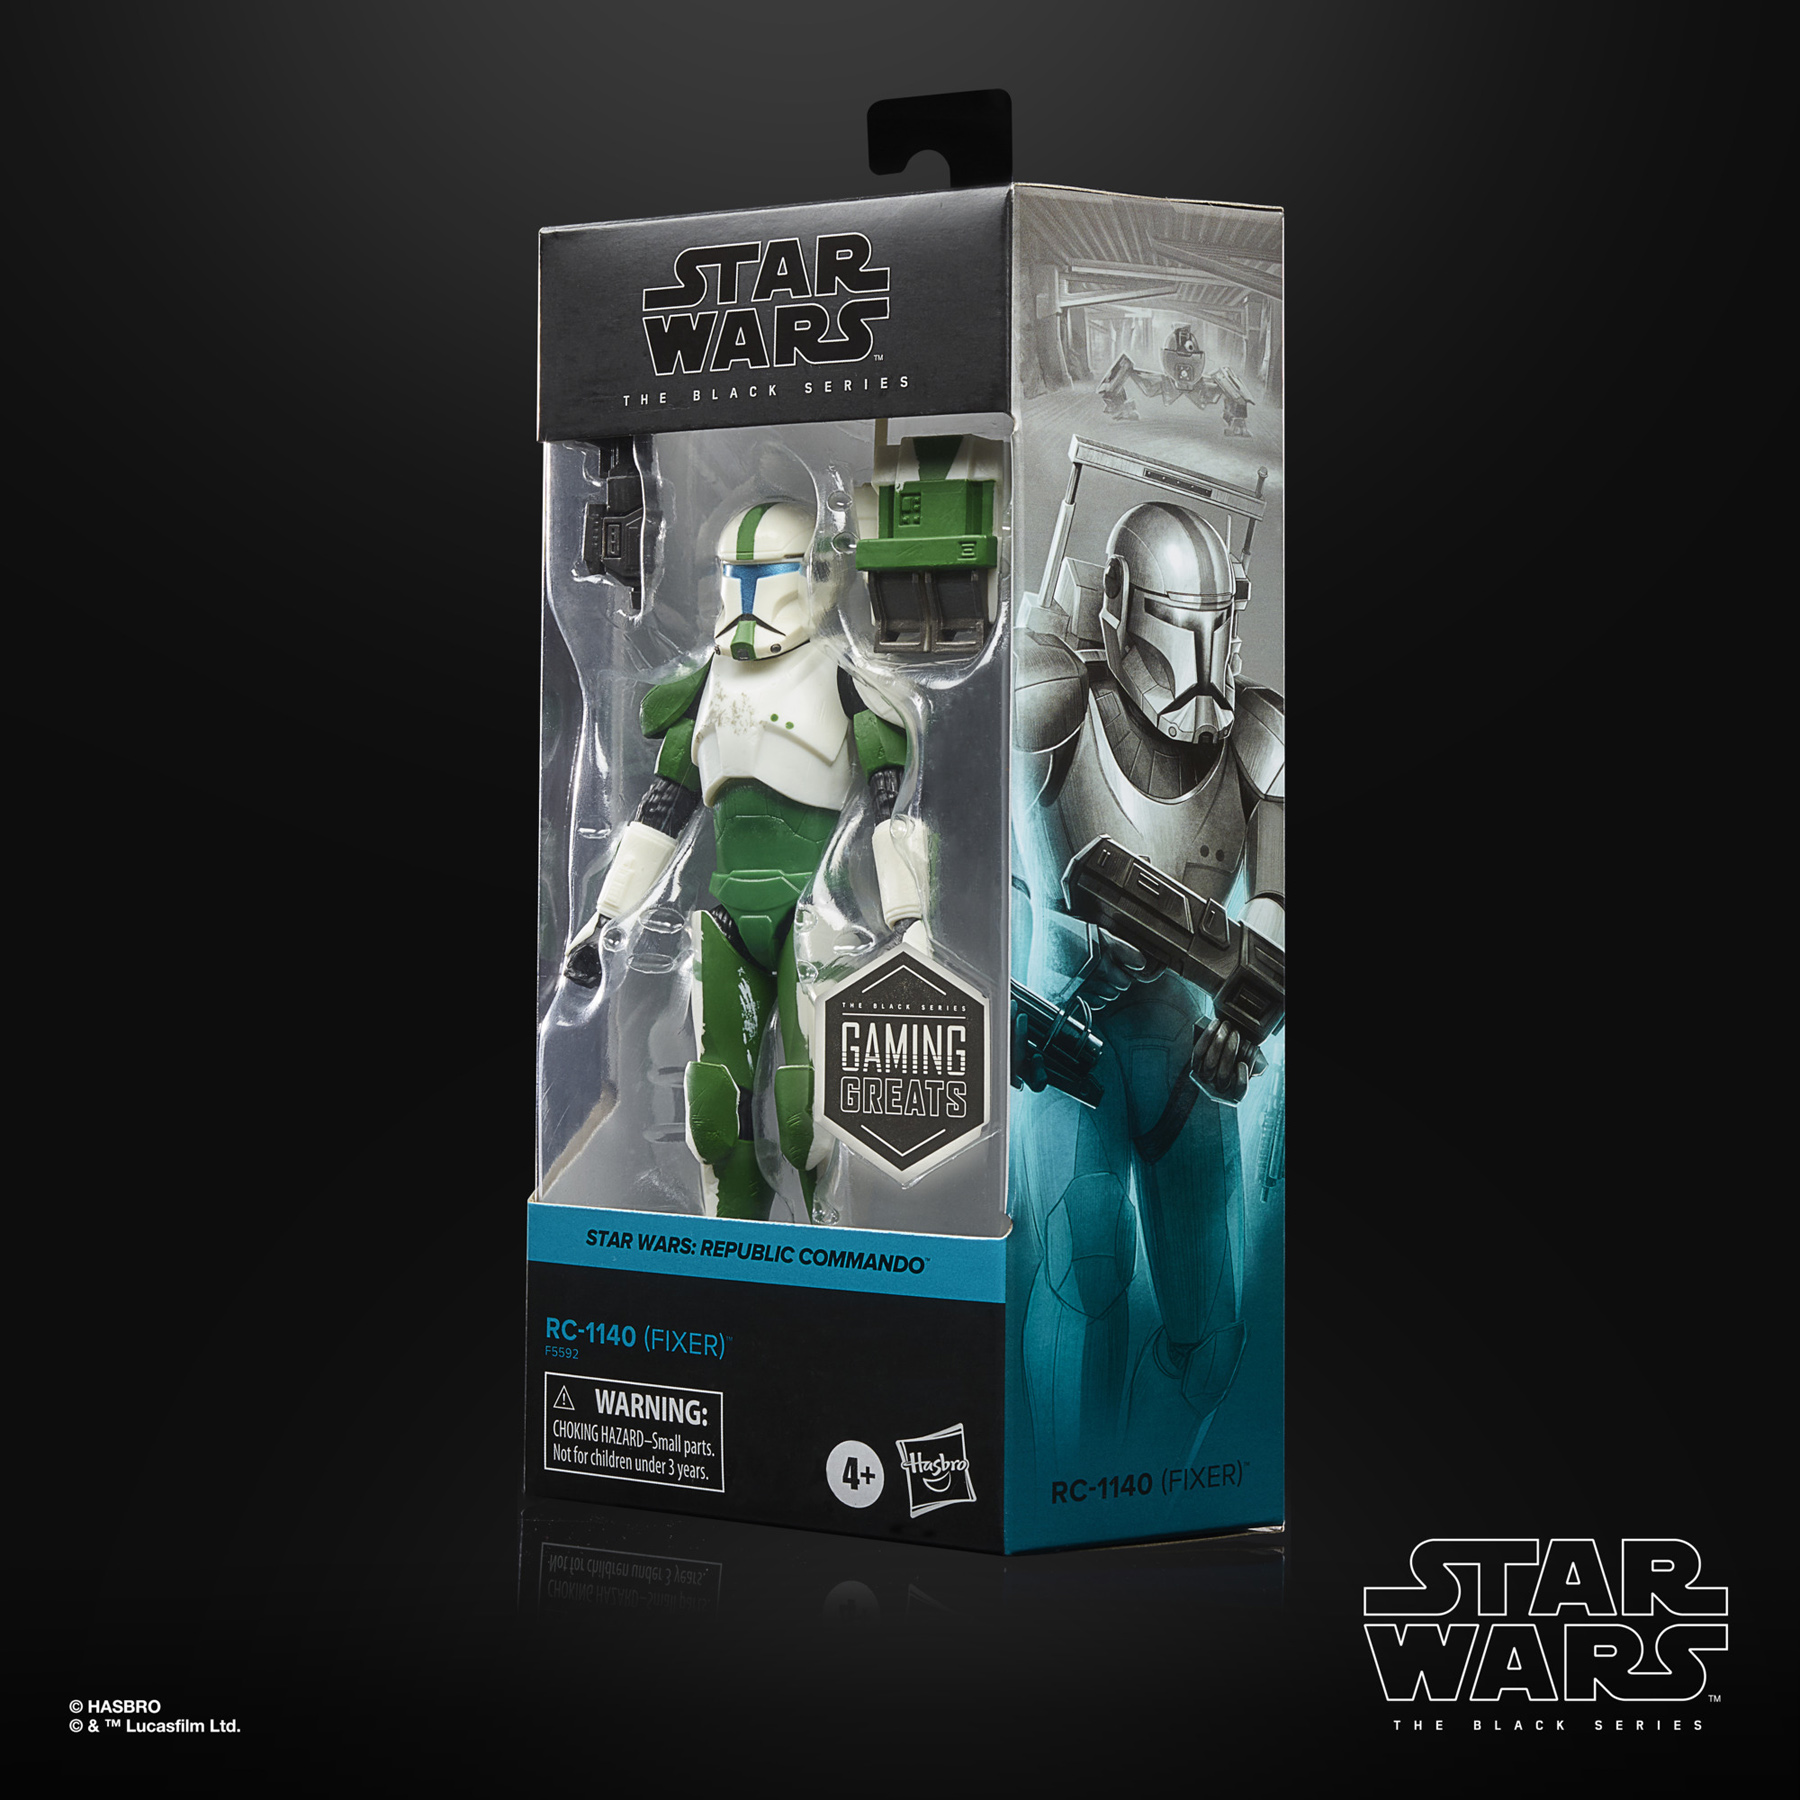 Star Wars The Black Series Gaming Greats RC-1140 (Fixer)  5010994182663 